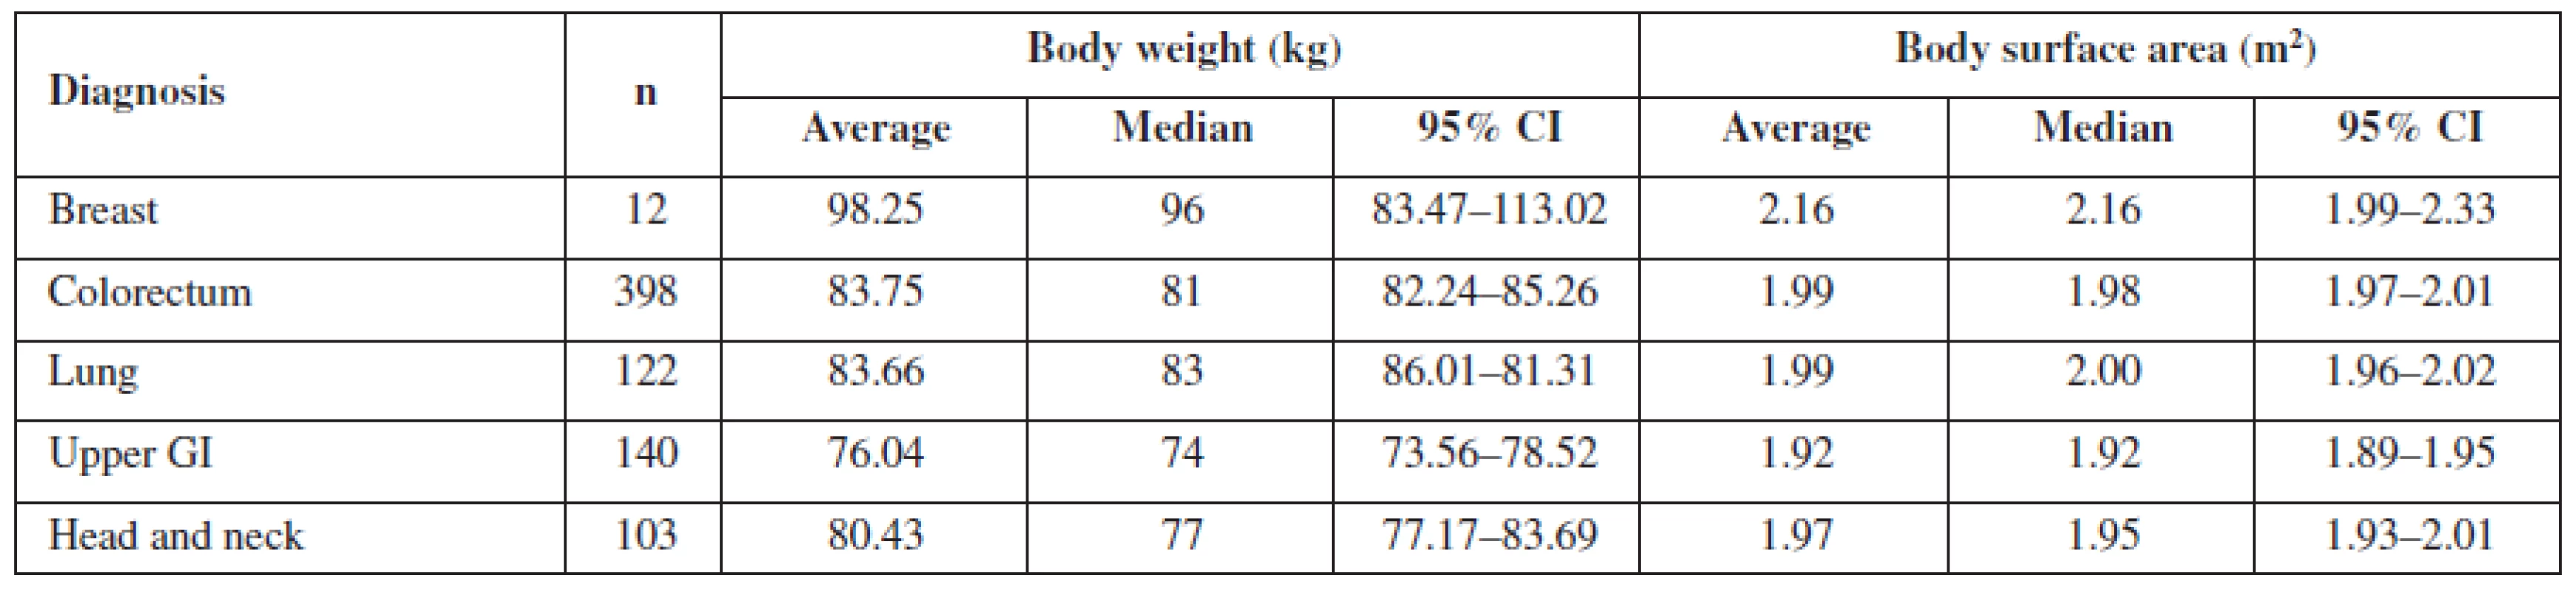 Mean body weight and mean body surface area for particular diagnoses in men